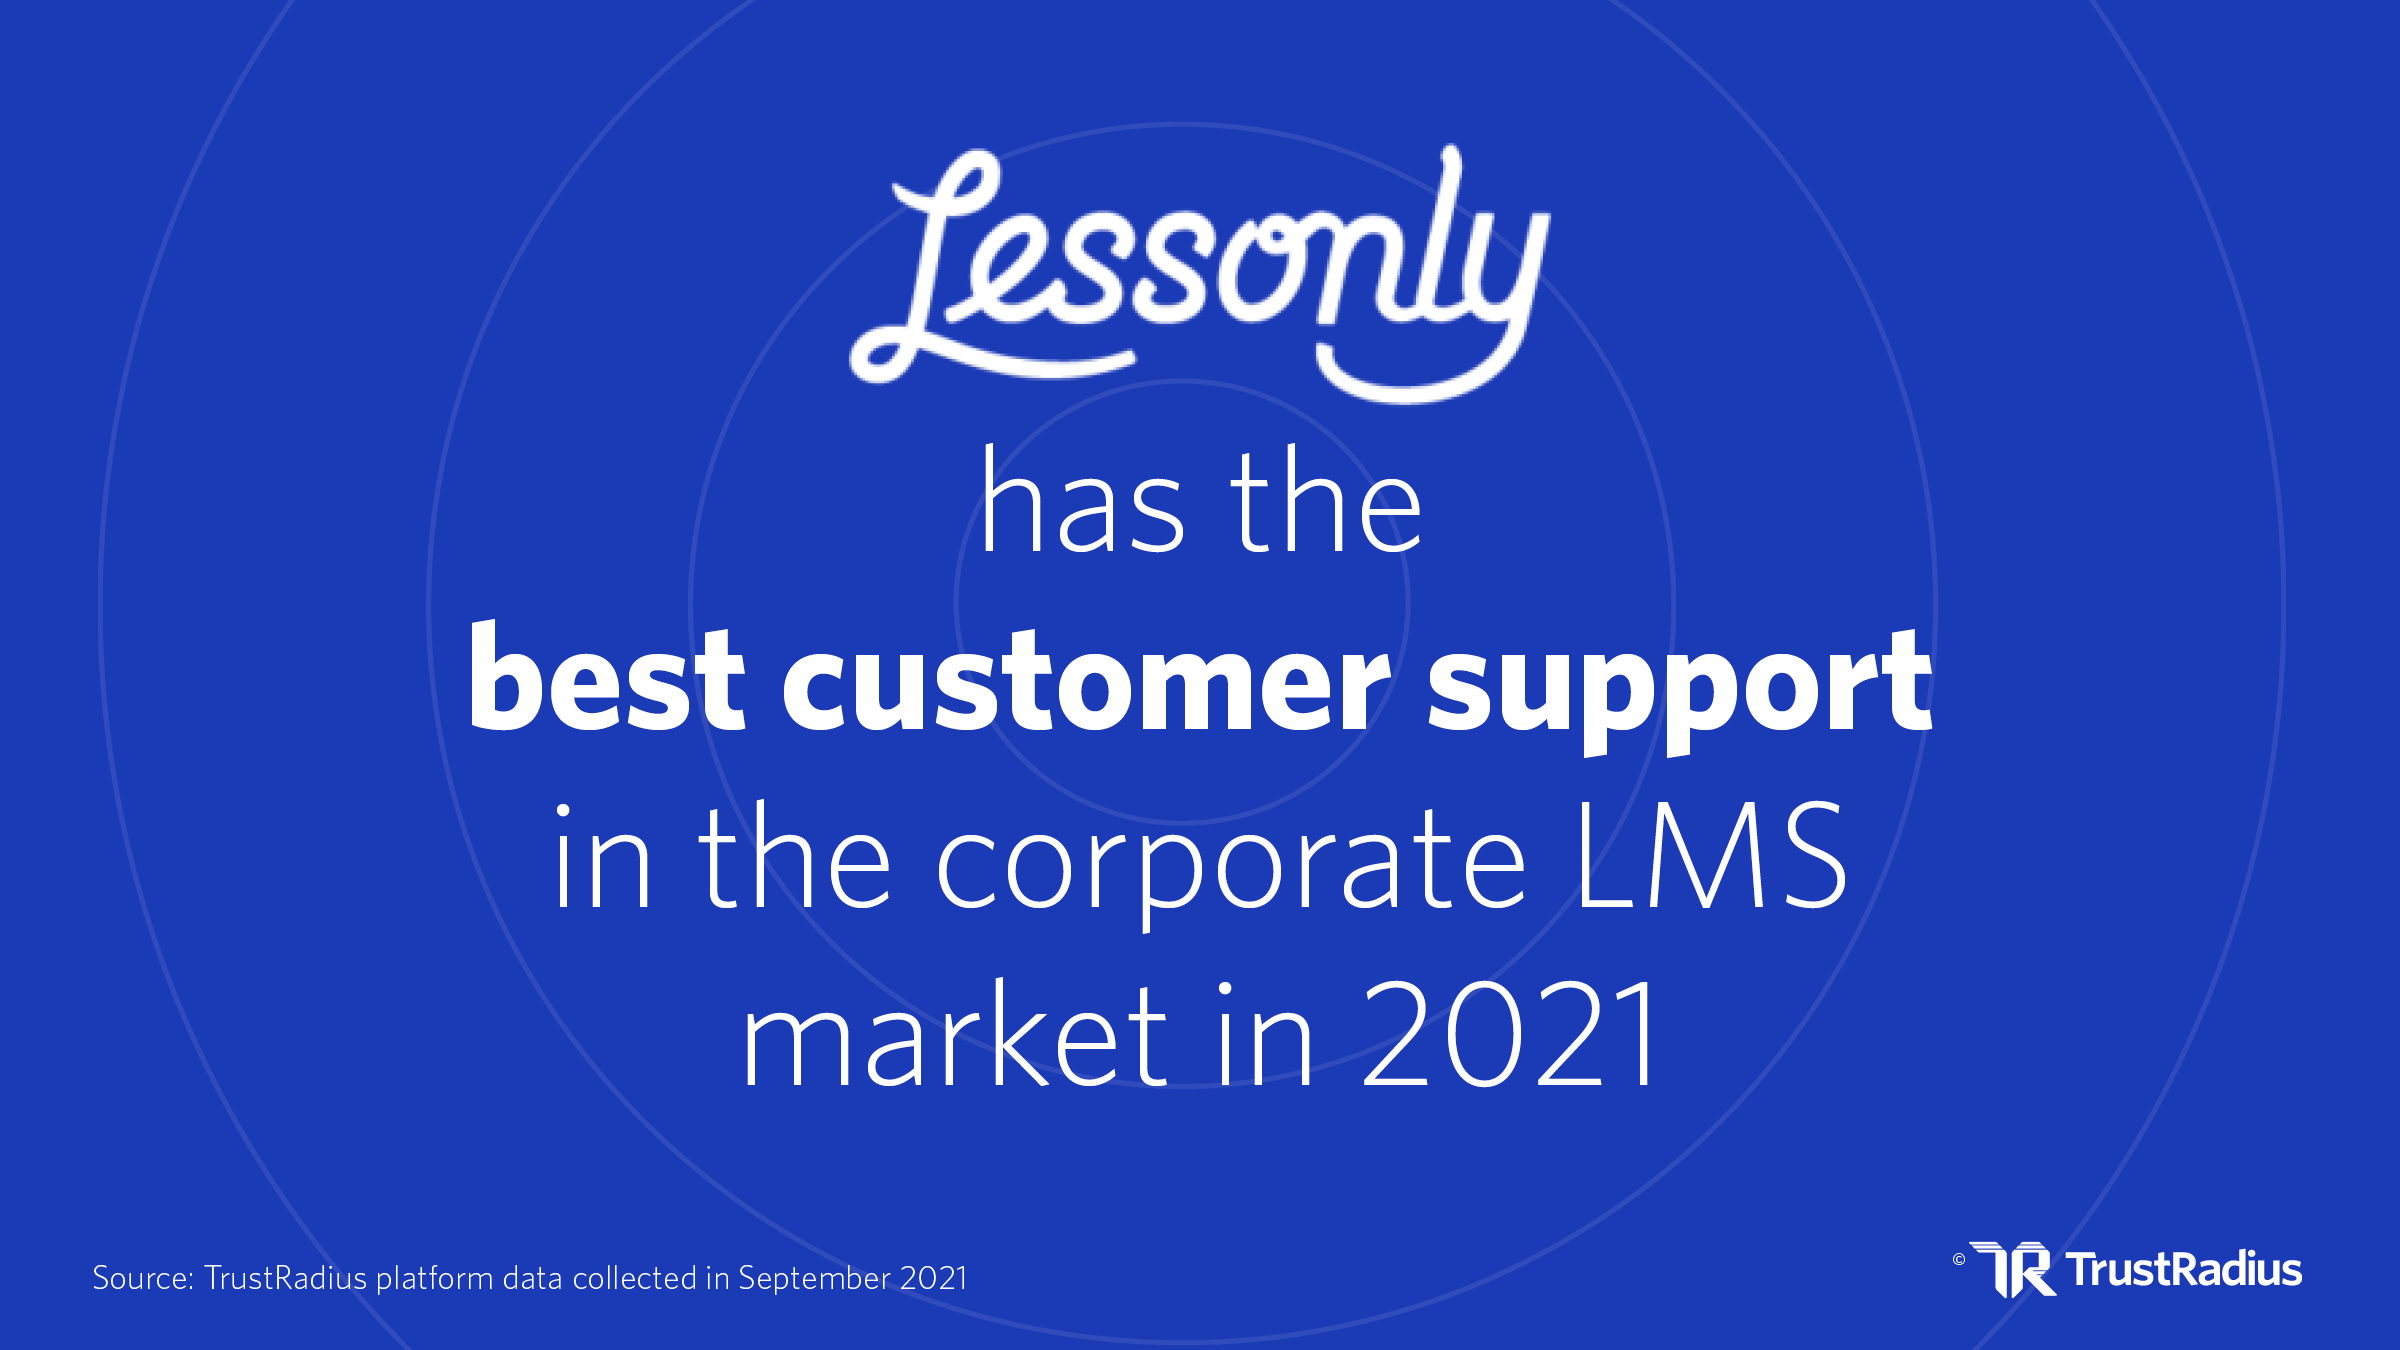 Lessonly has the best customer support in 2021